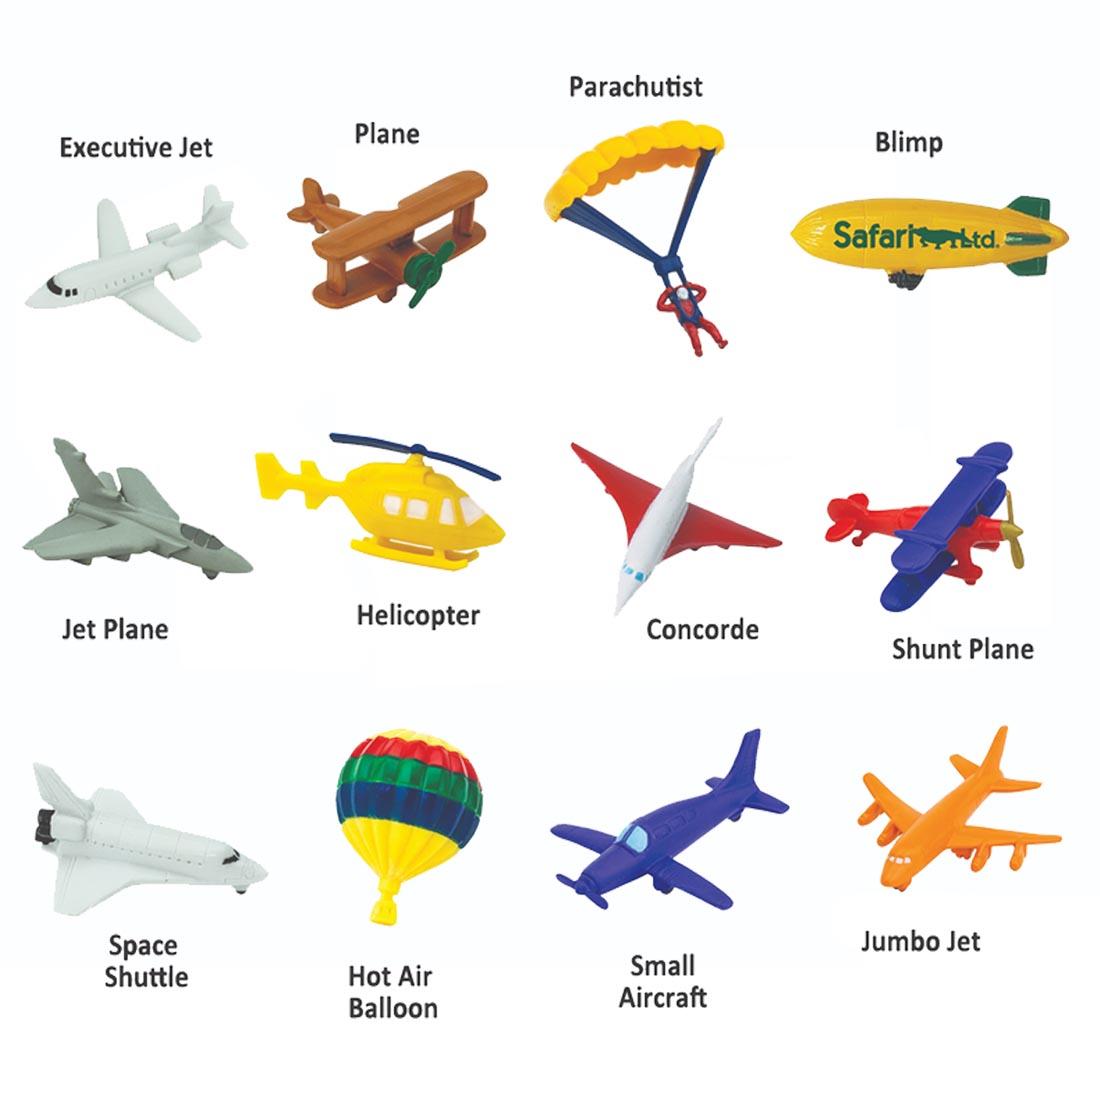 12 pieces of In the Sky Figurines labeled with their names: executive jet, plane, parachutist, blimp, jet plane, helicopter, Concorde, shunt plane, space shuttle, hot air balloon, small aircraft, jum